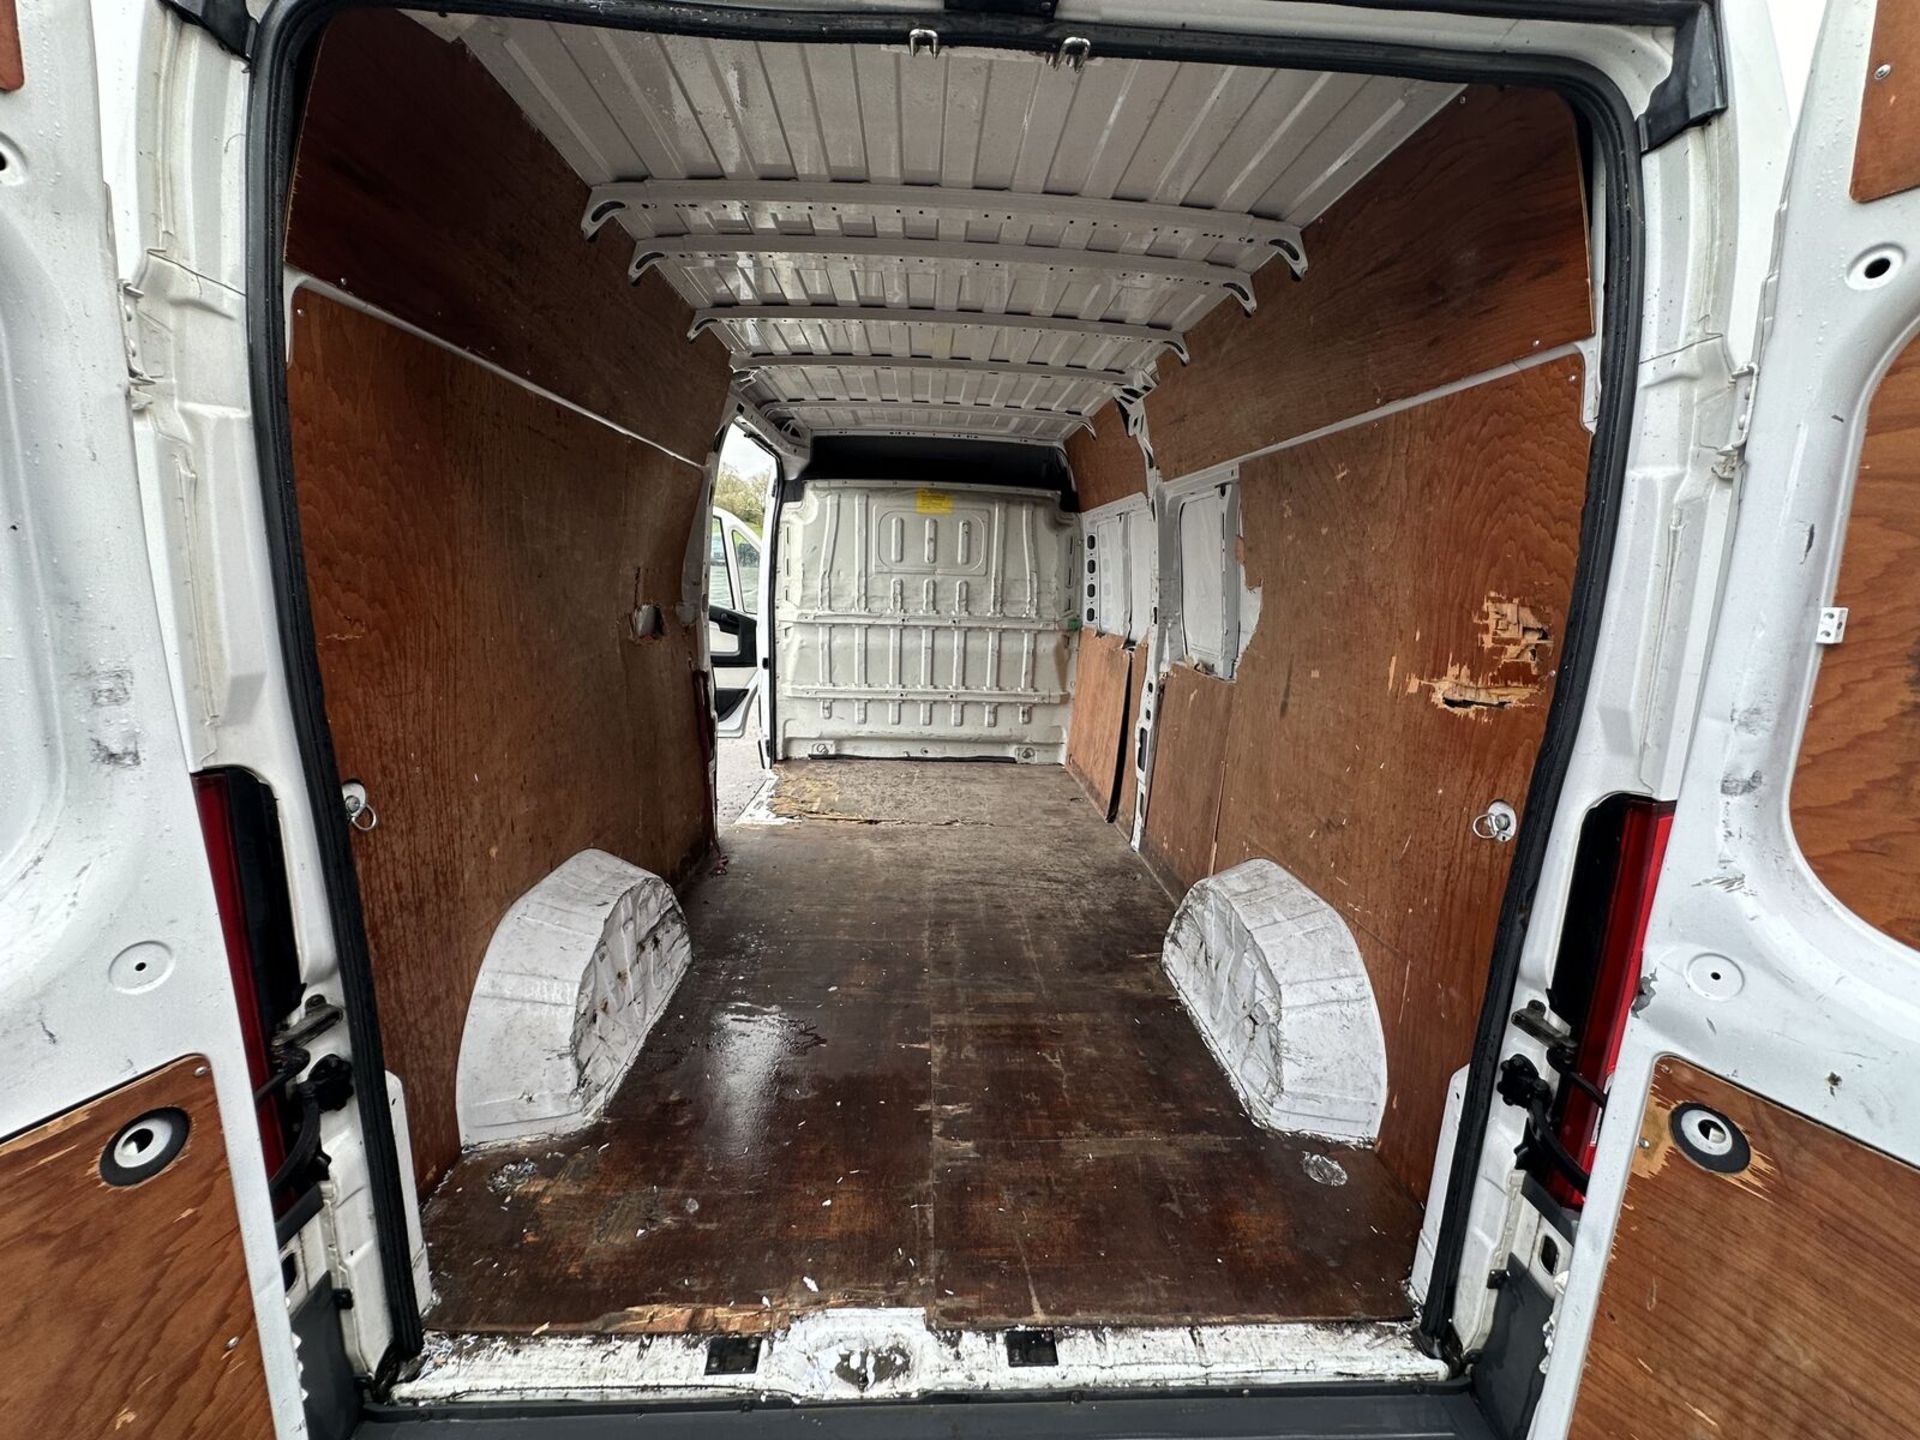 READY FOR ADVENTURE: 65 PLATE DUCATO 35 MULTIJET LWB - Image 17 of 19